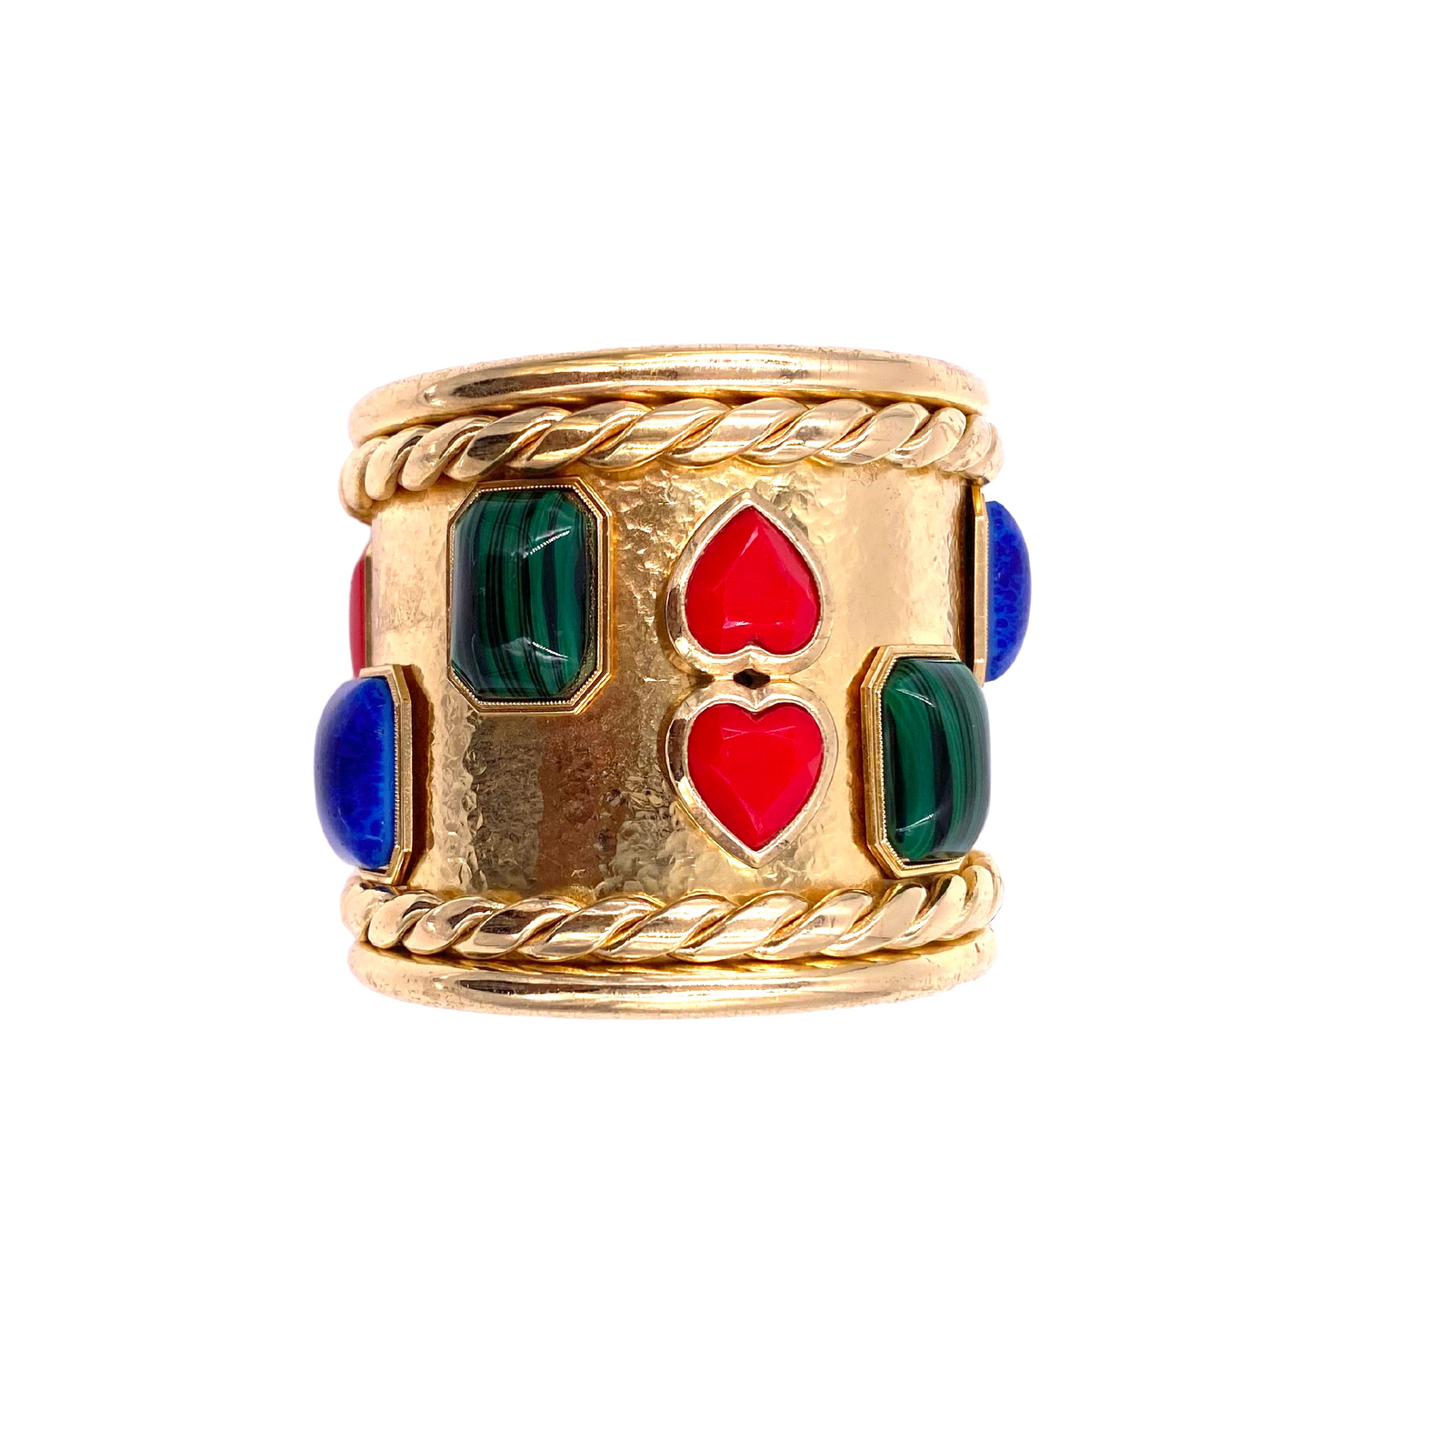 Christian Lacroix Gold Cuff with Green/red/blue Glass Stones